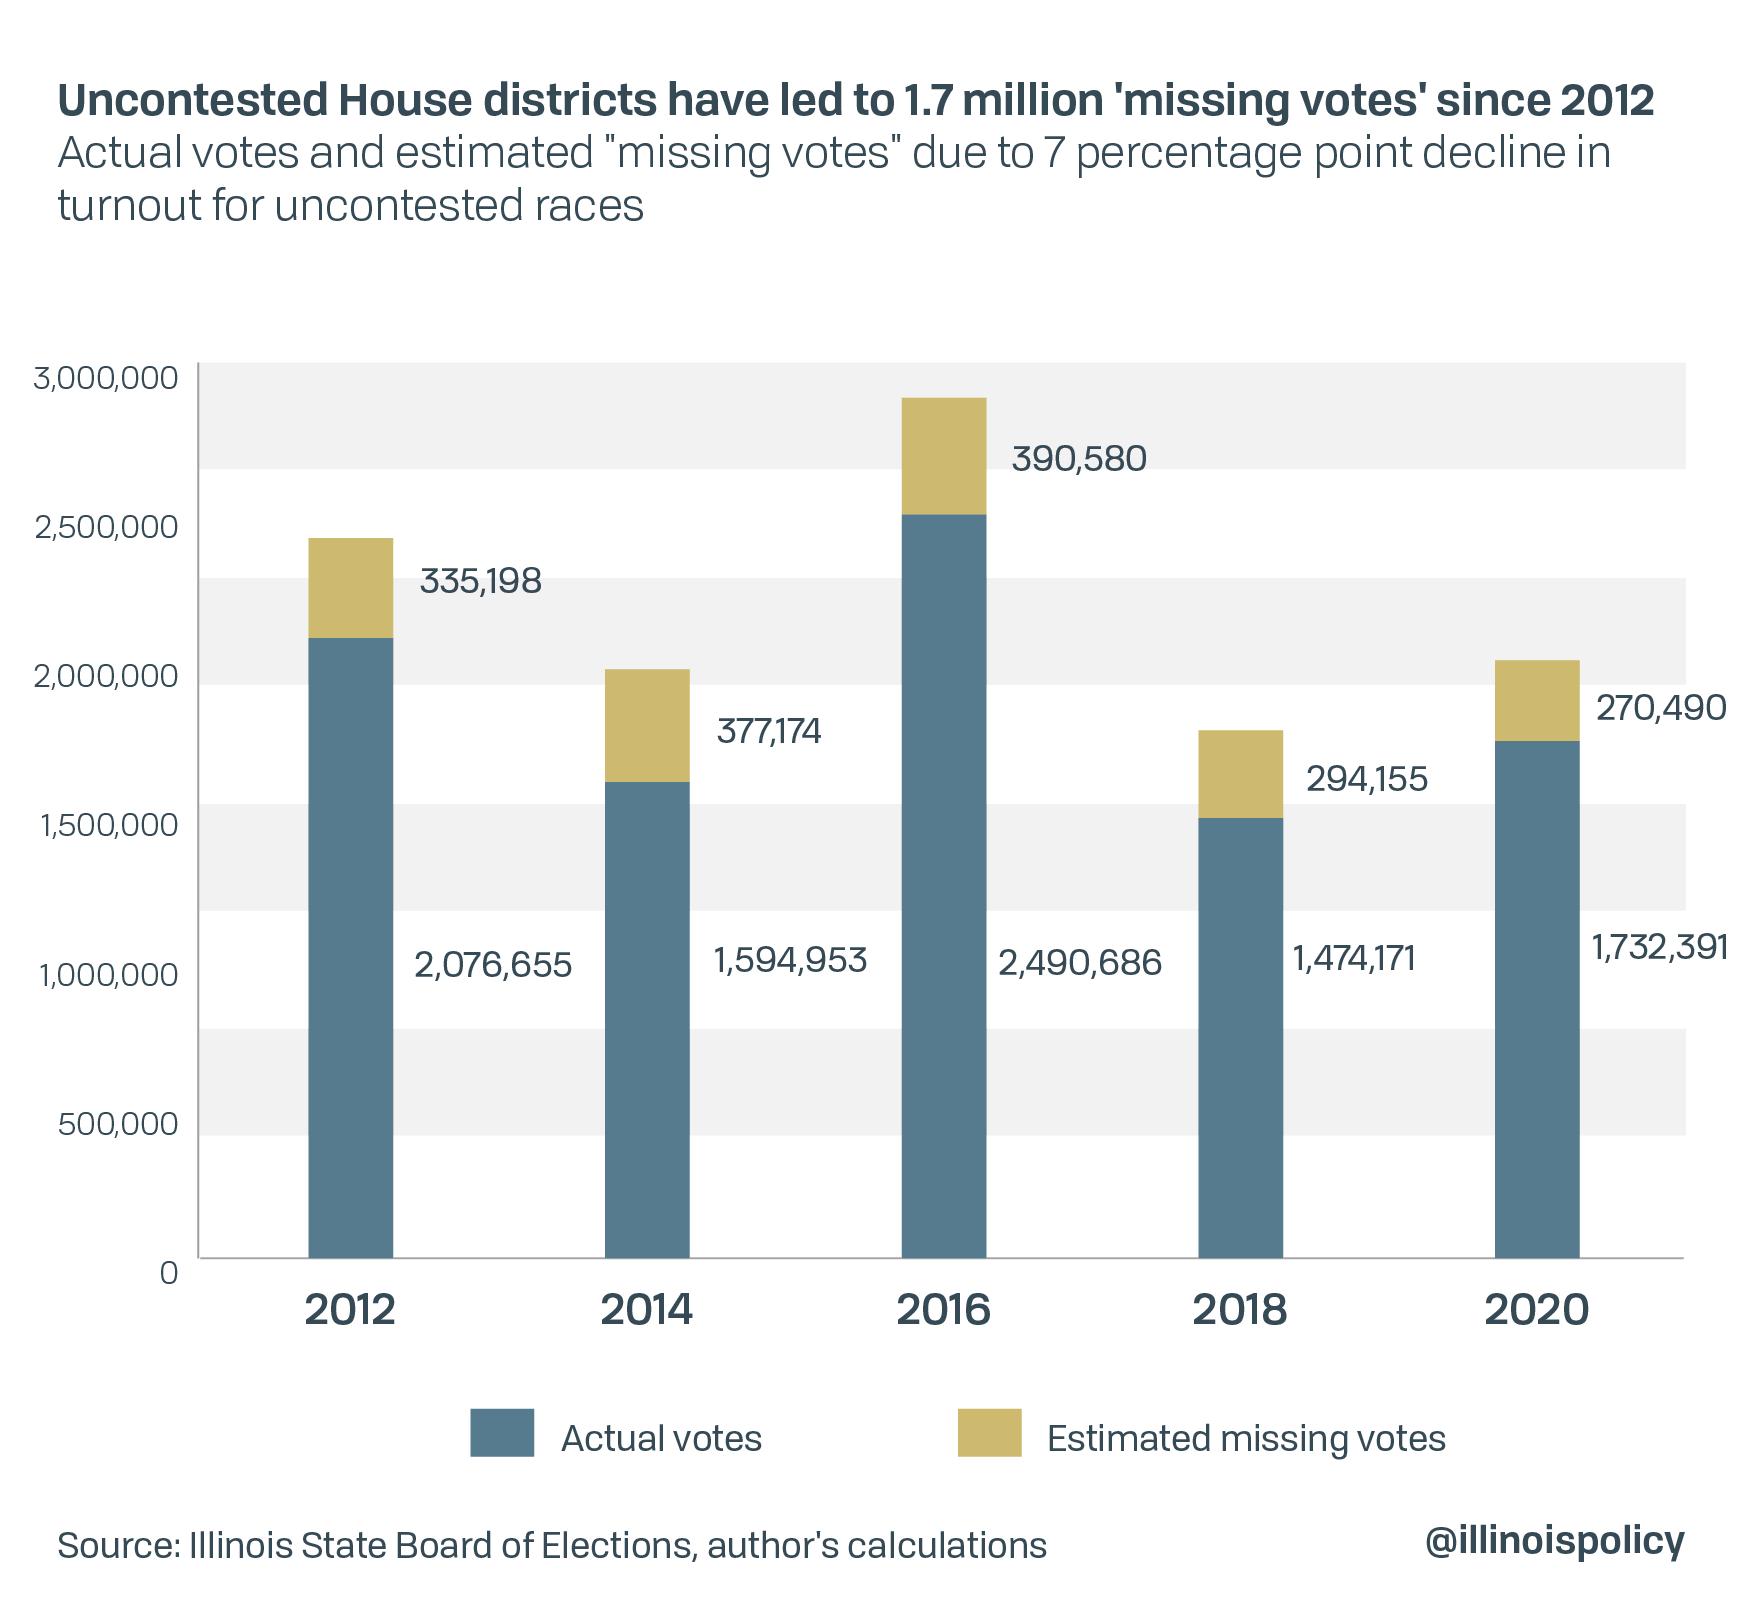 Uncontested House districts have led to 1.7 million 'missing votes' since 2012